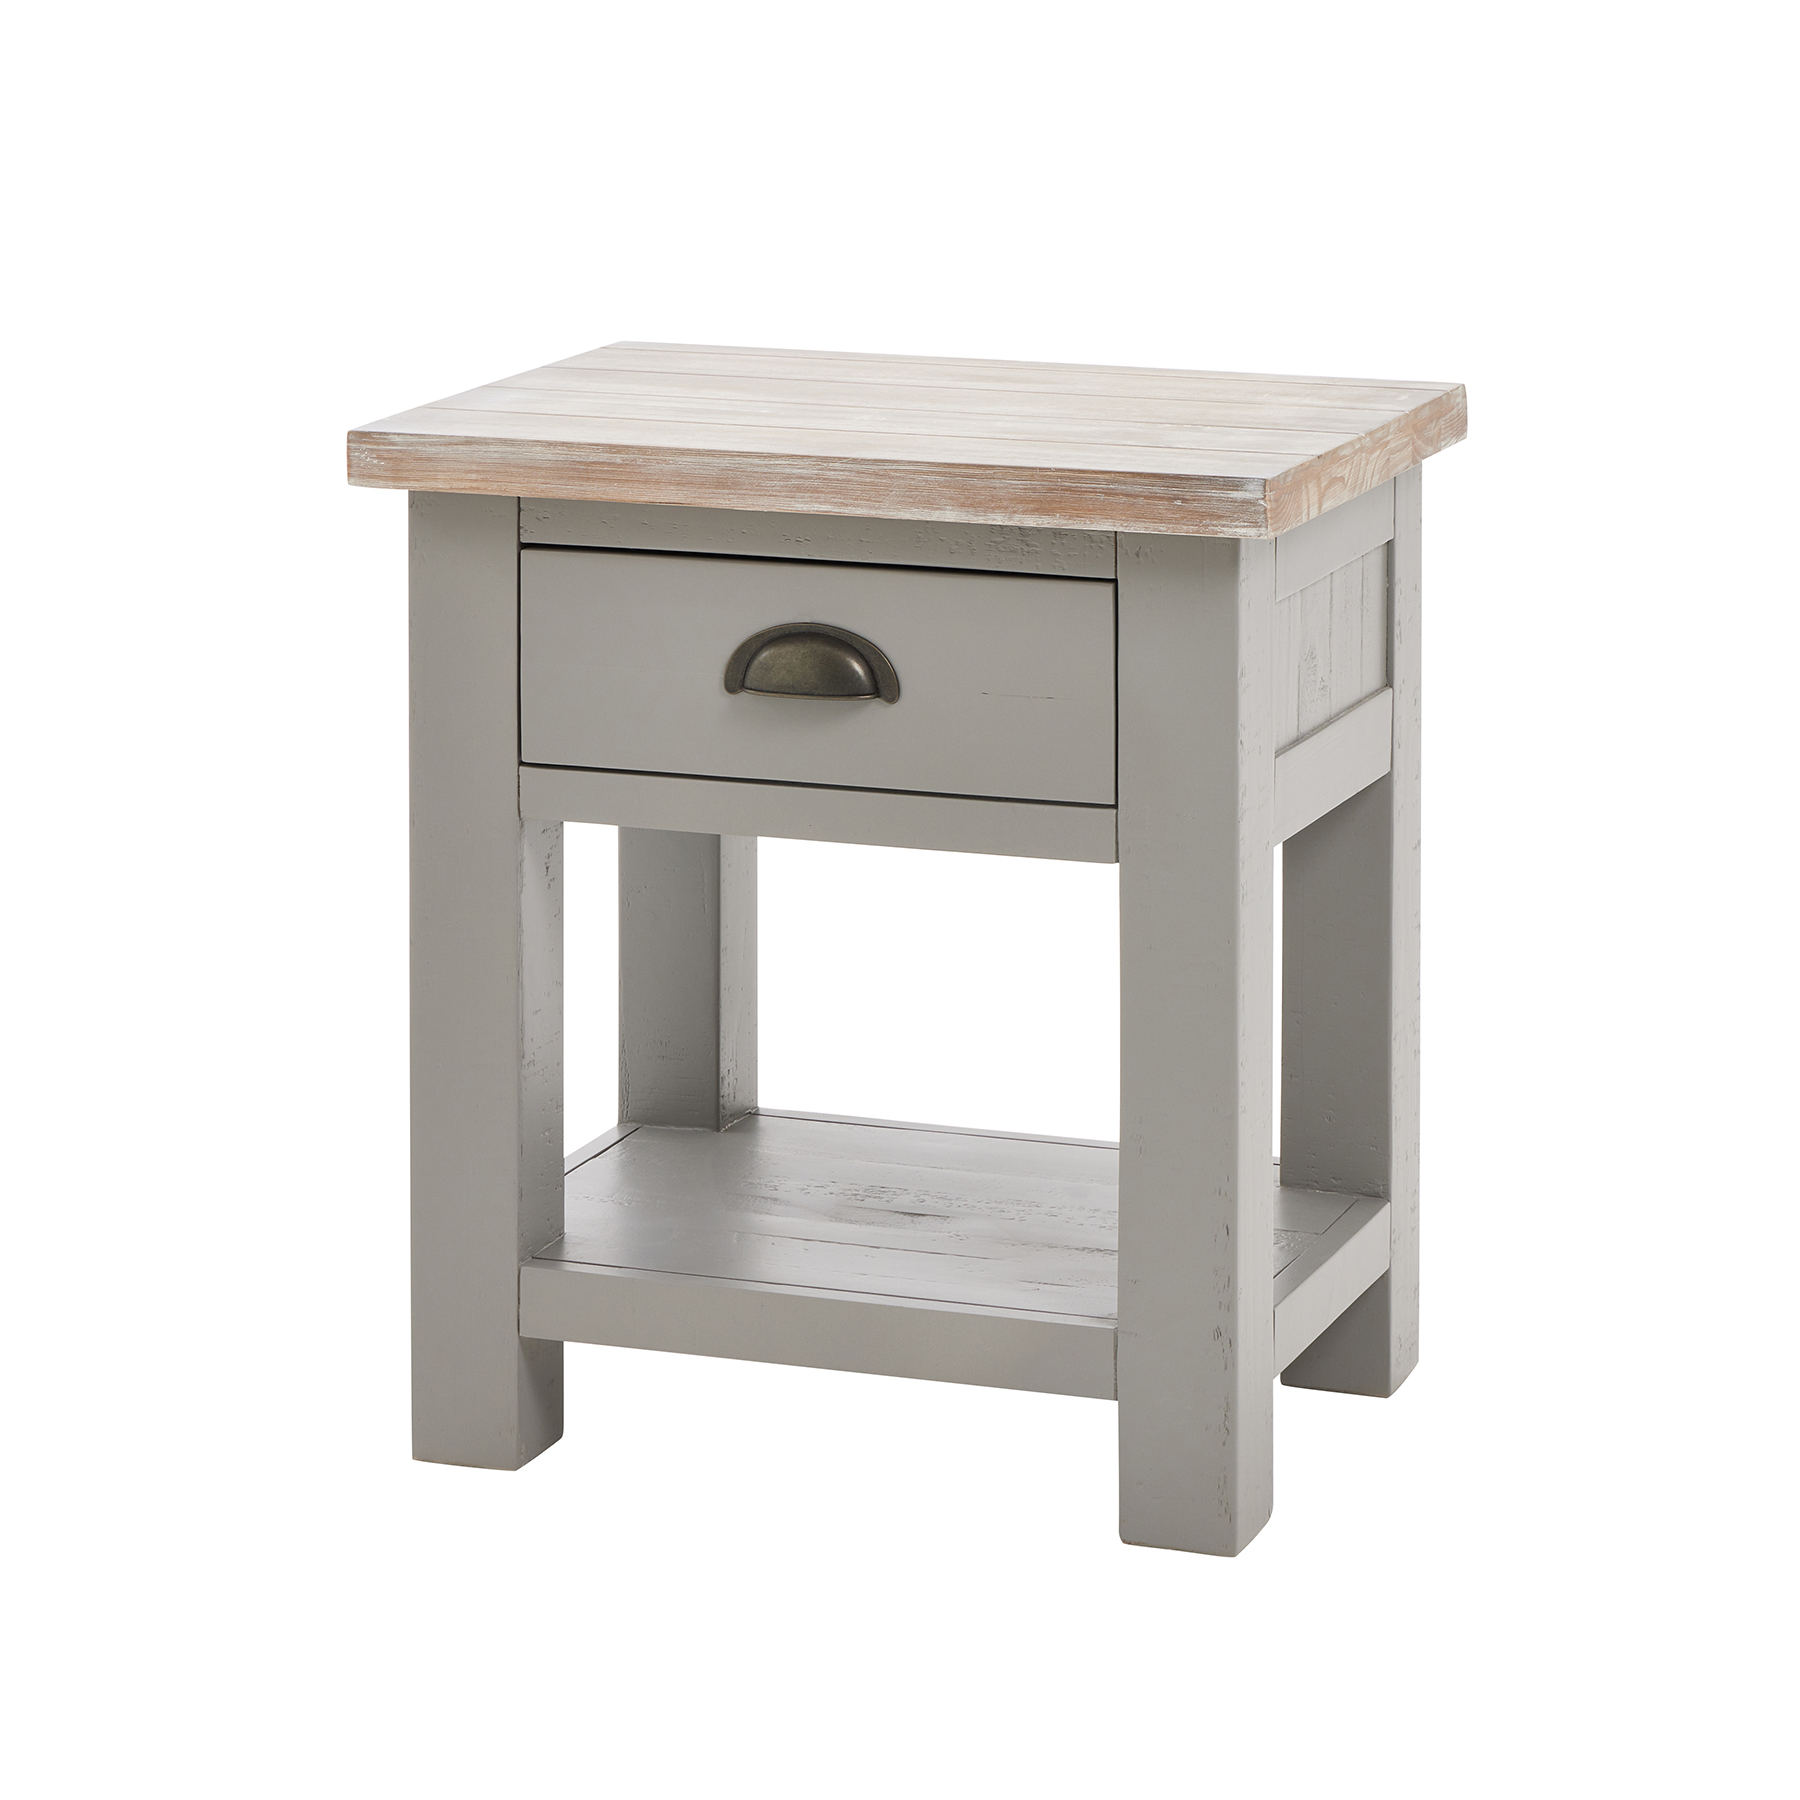 The Oxley Collection Side Table